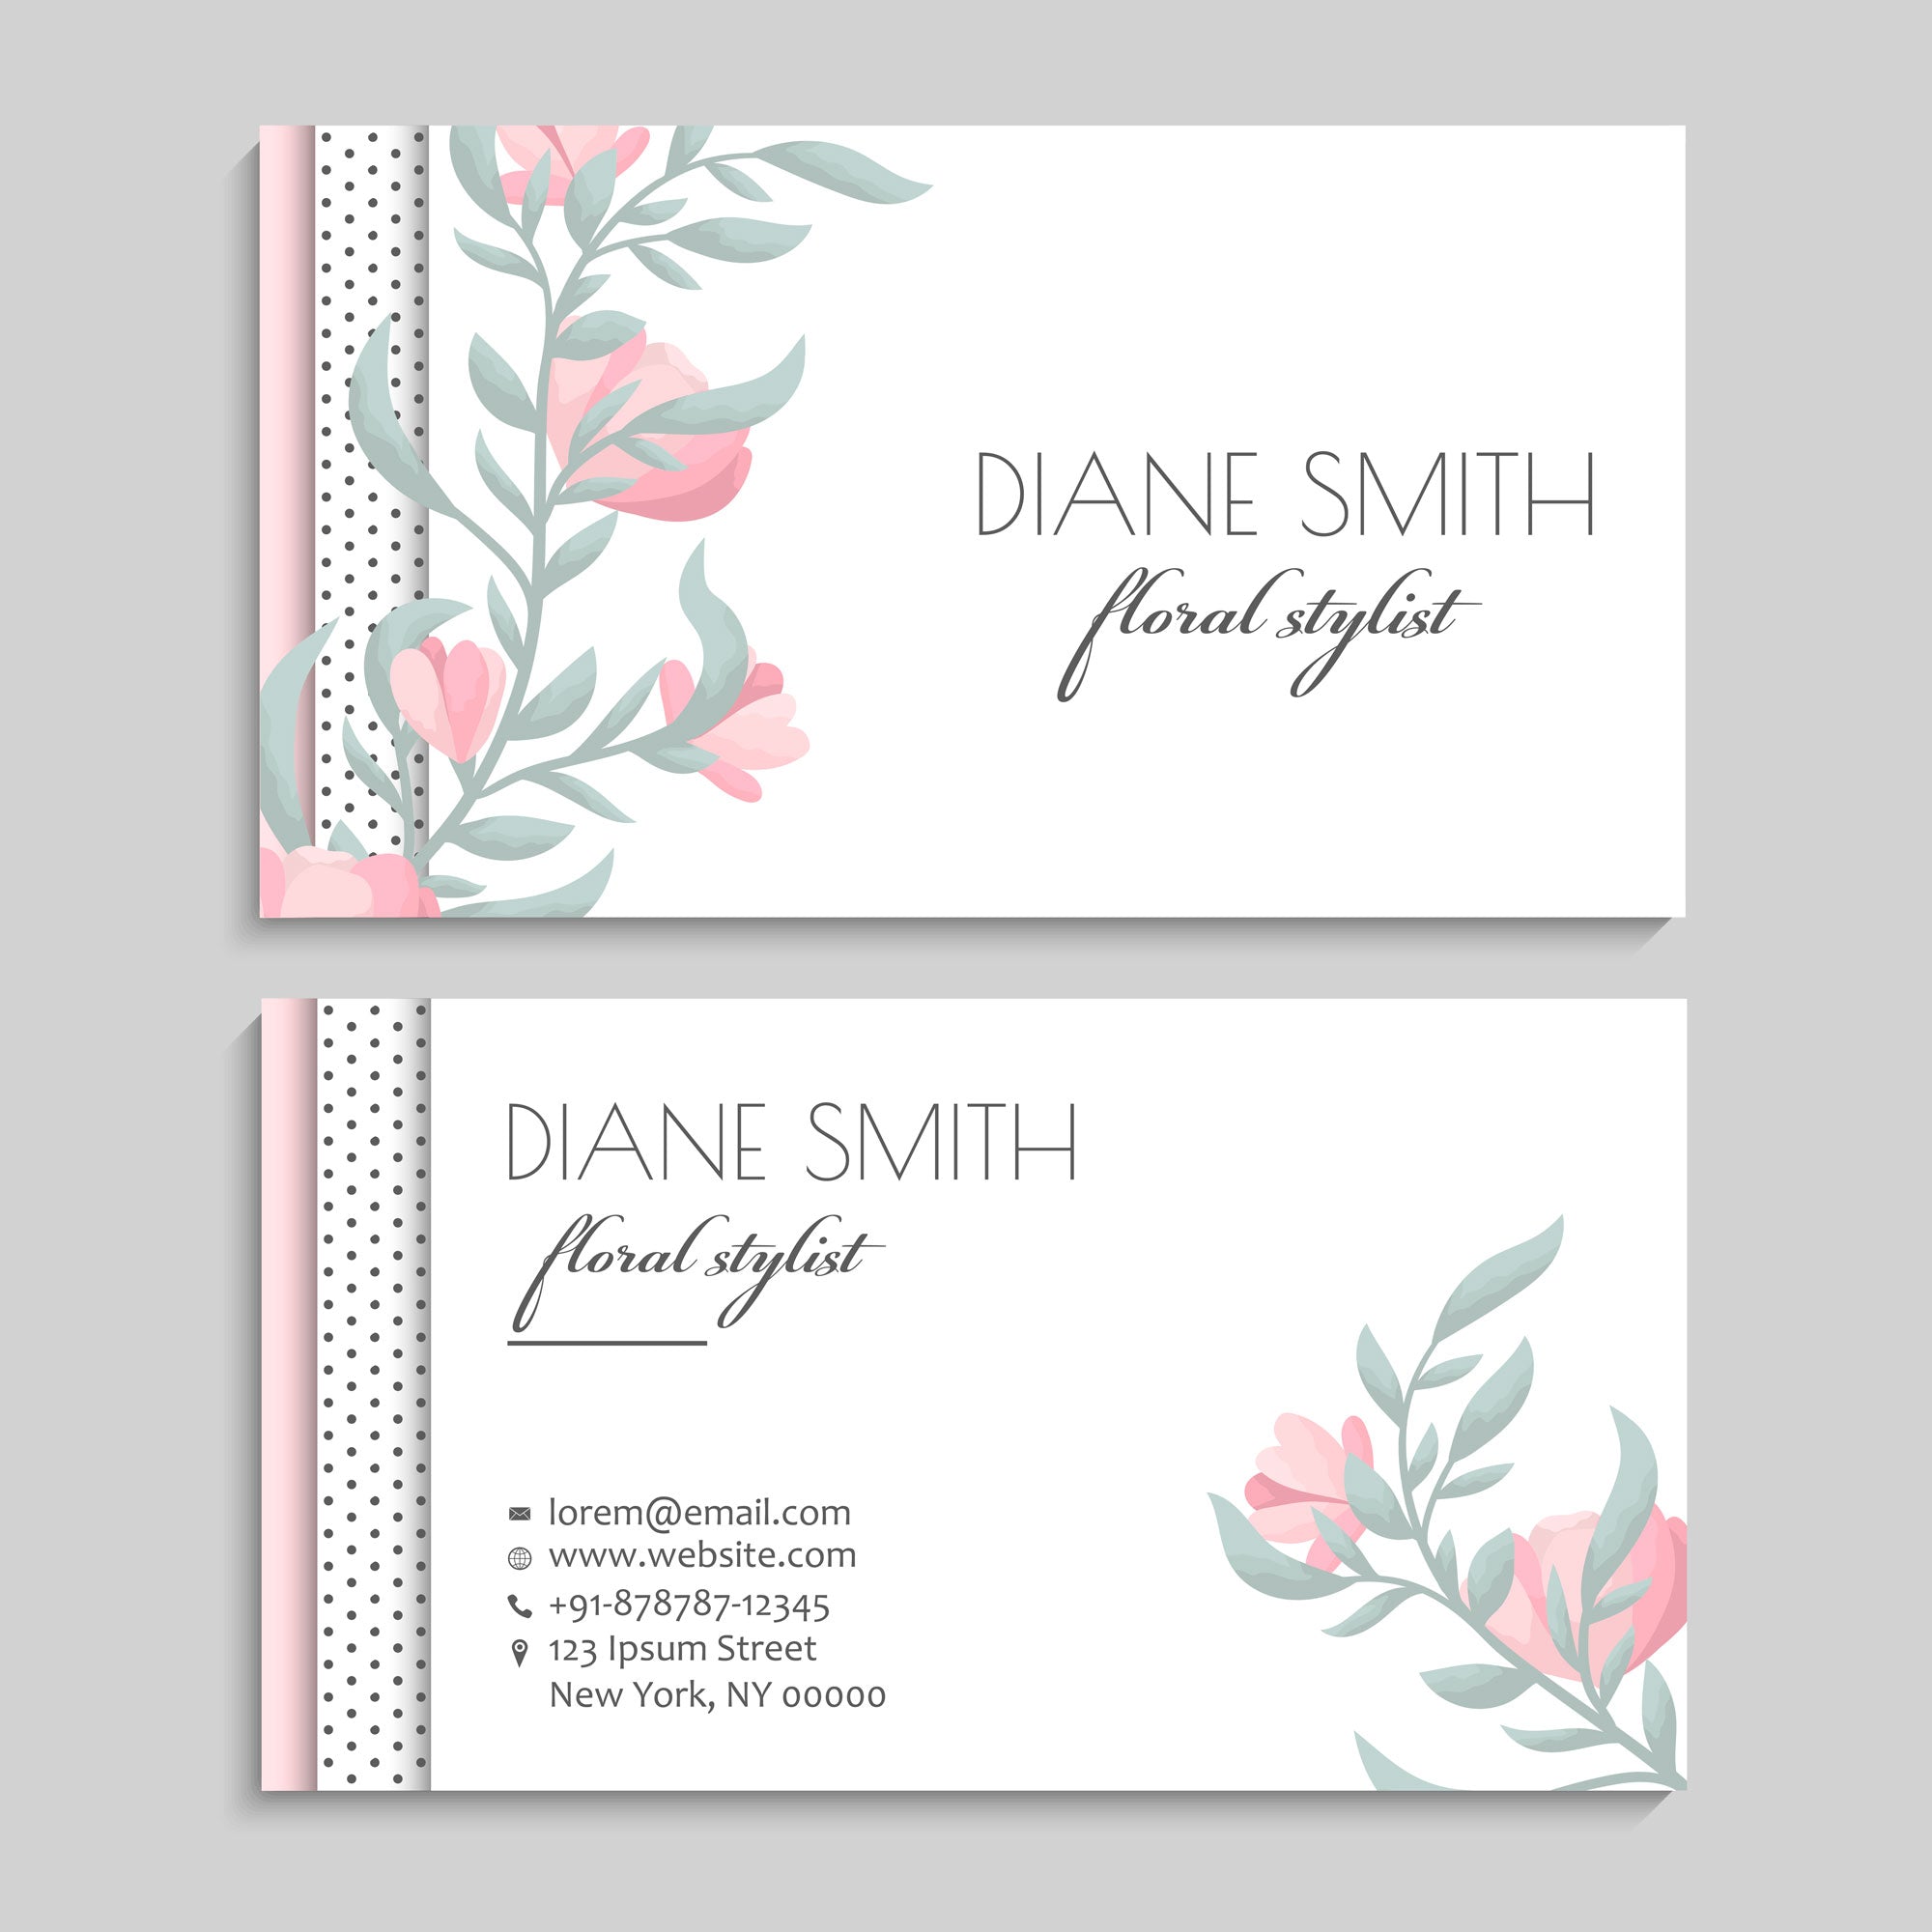 Plantable Peachy Perfect Business Cards - 250 Cards